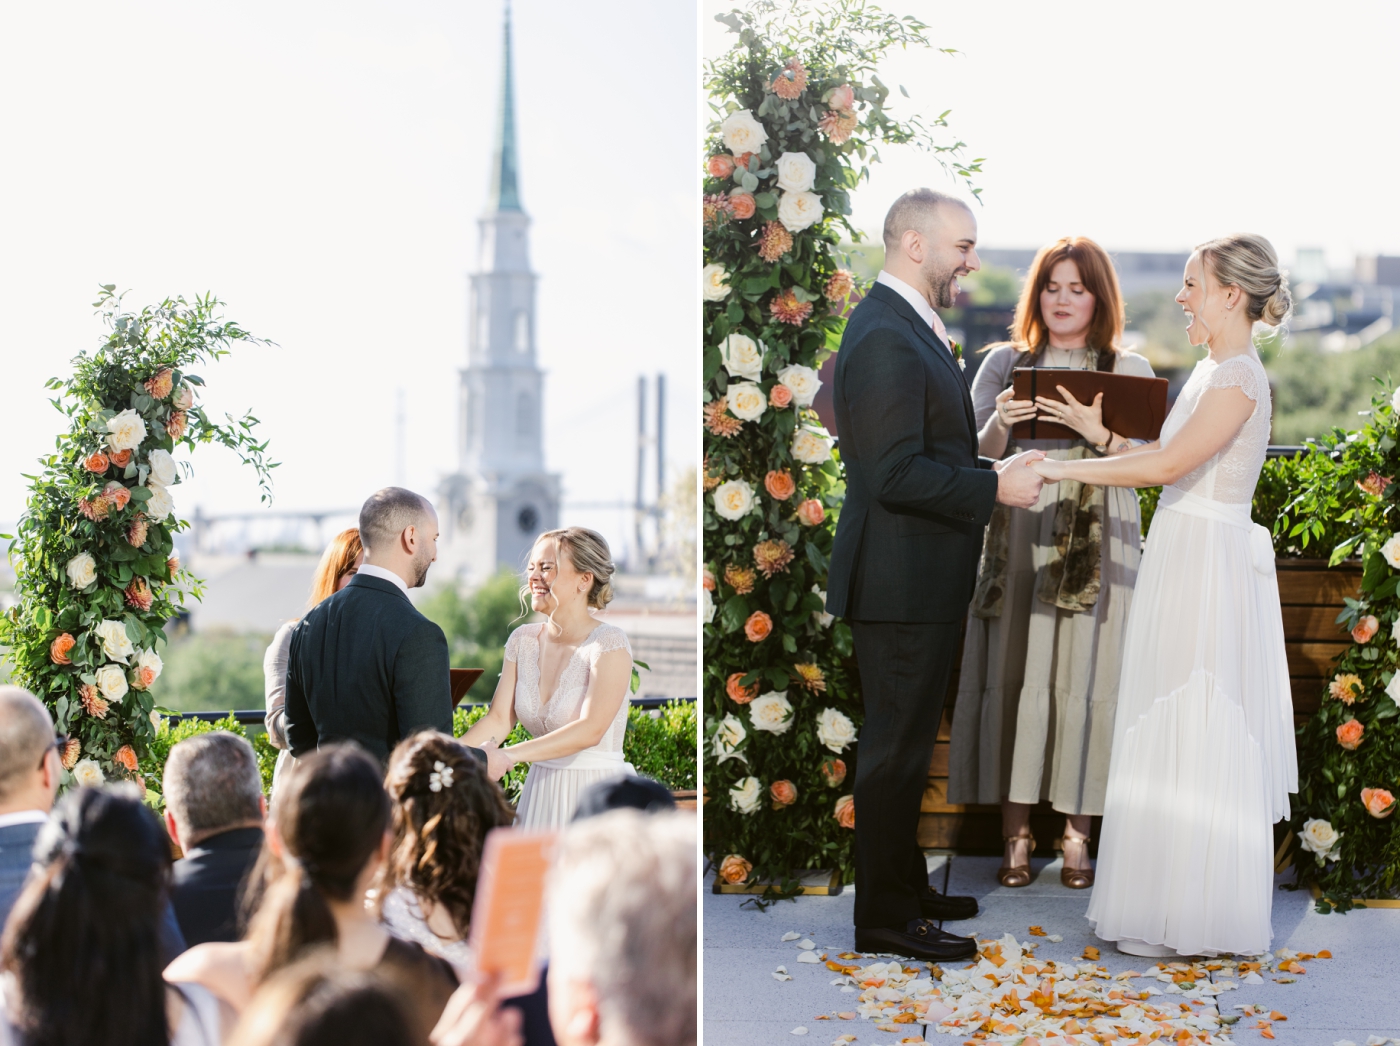 rooftop wedding ceremony at Perry Lane Hotel